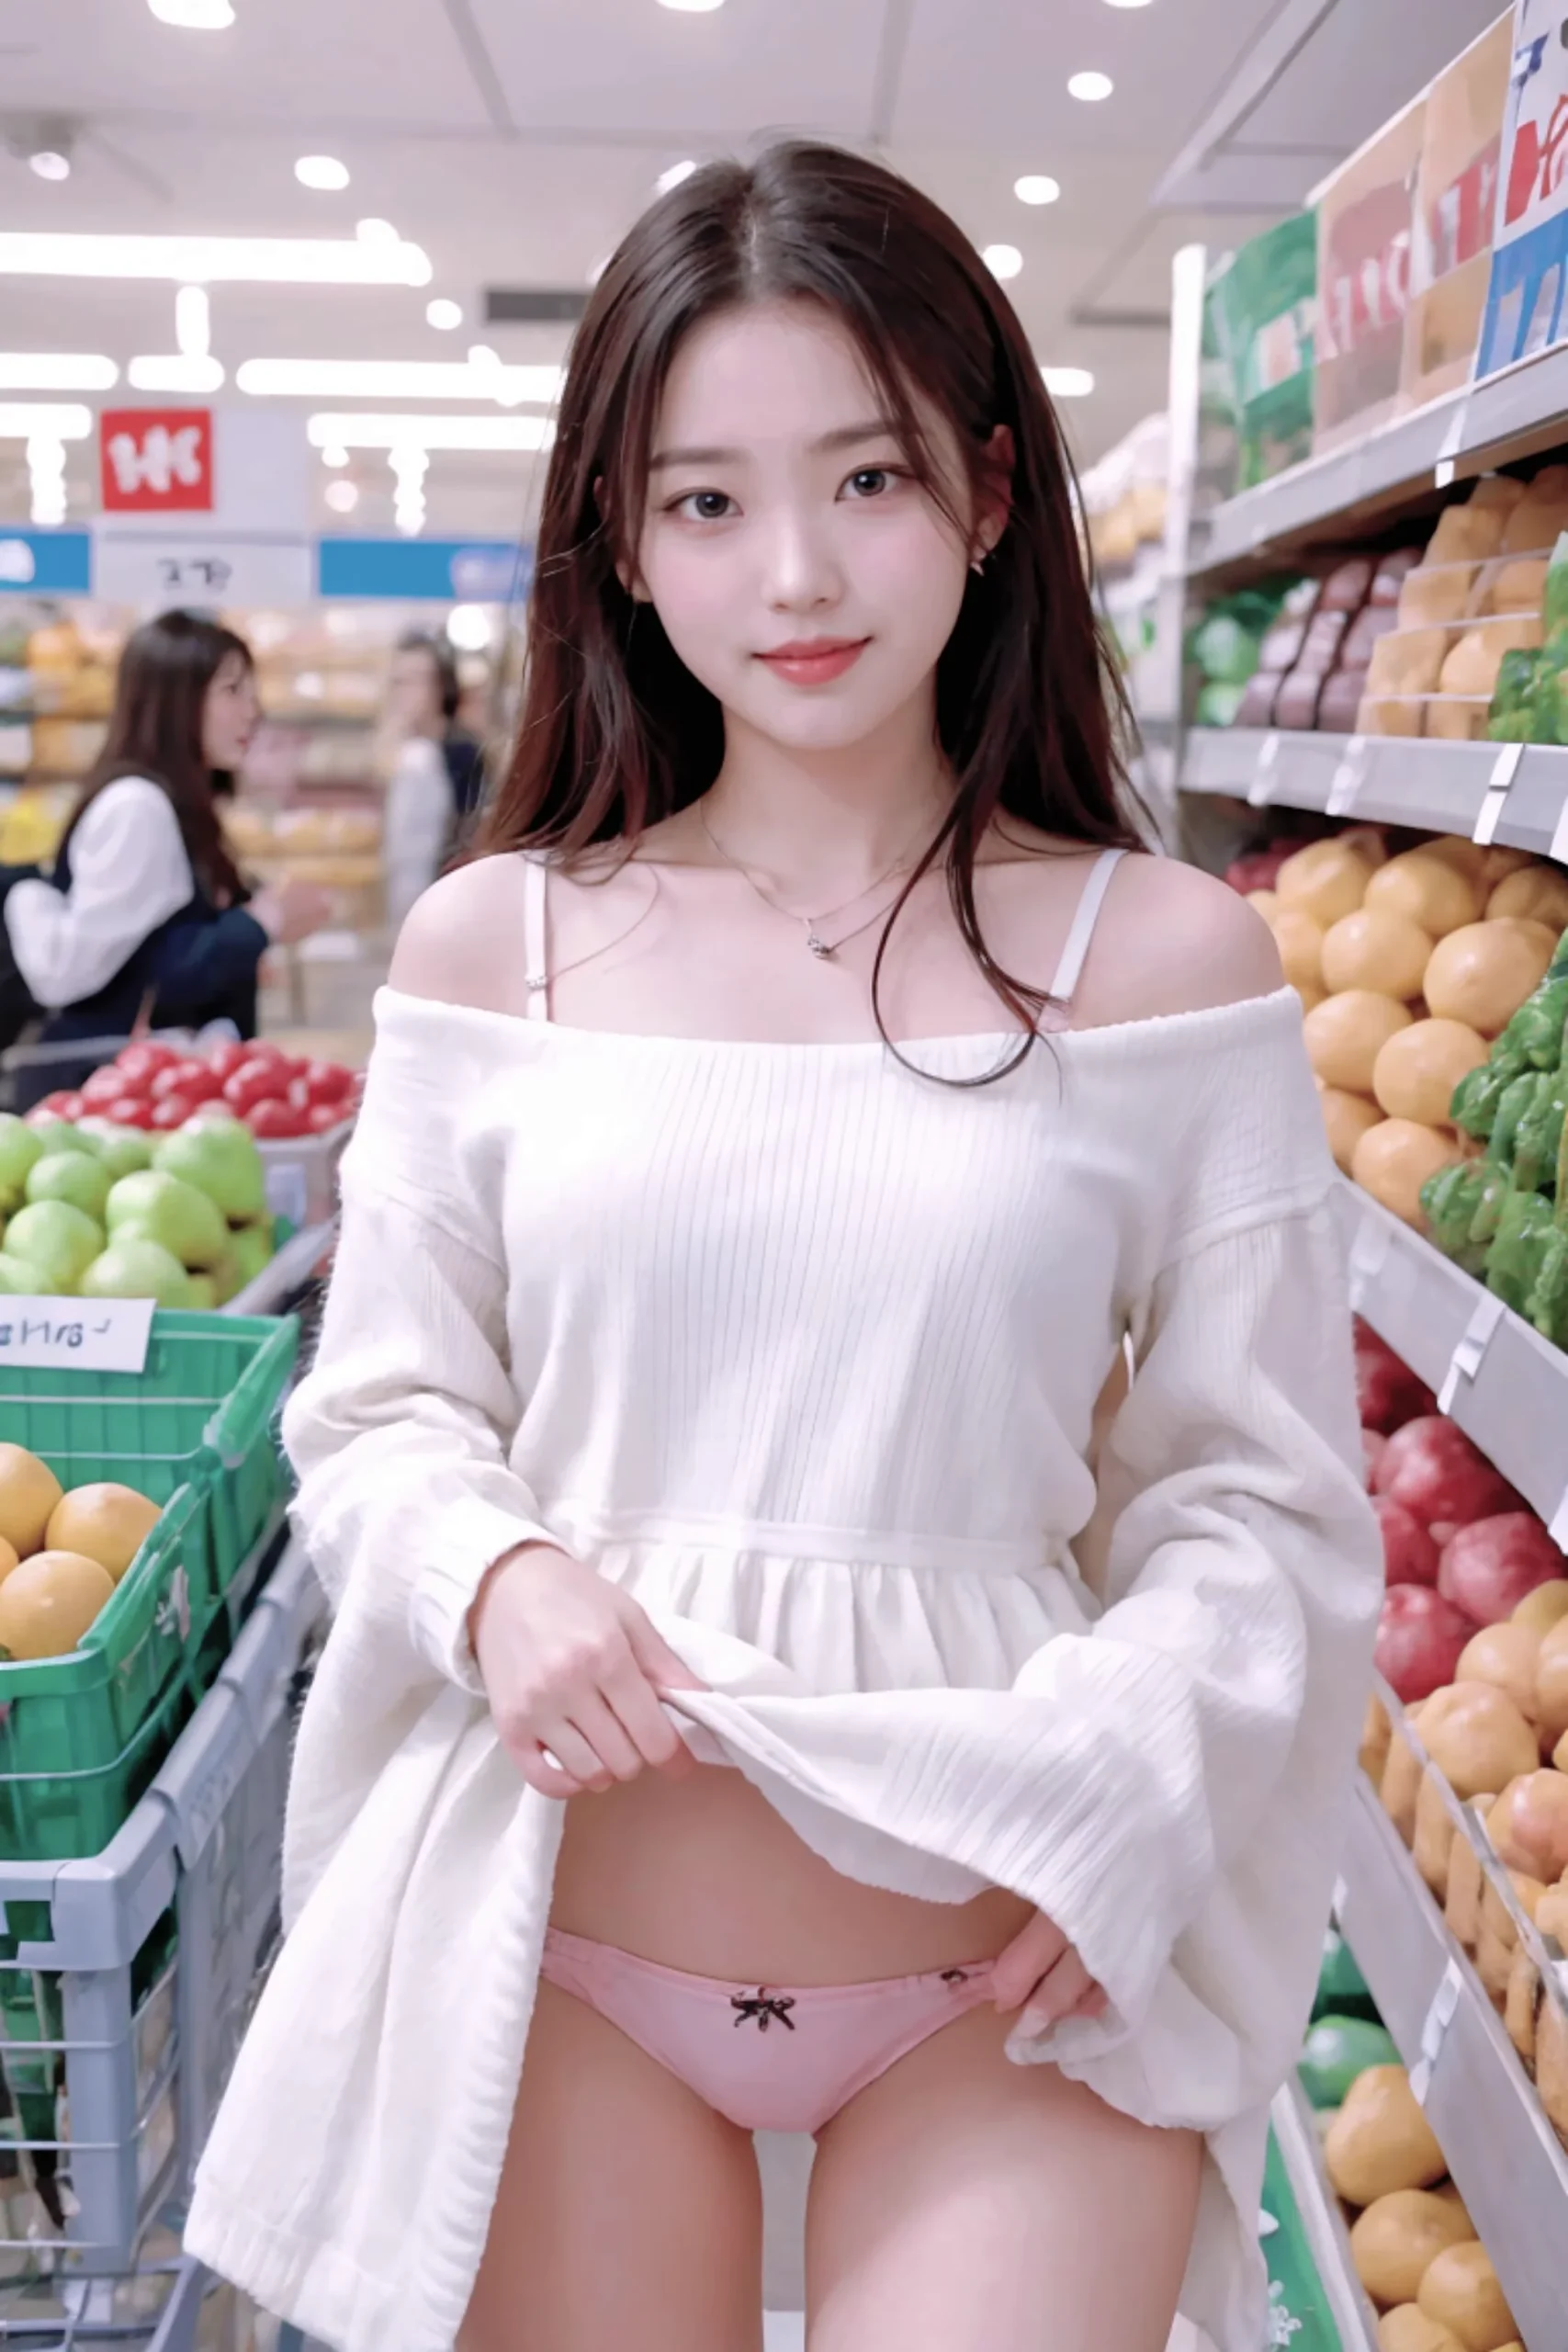 Young Lady Flashing Panties In A Store Images 01